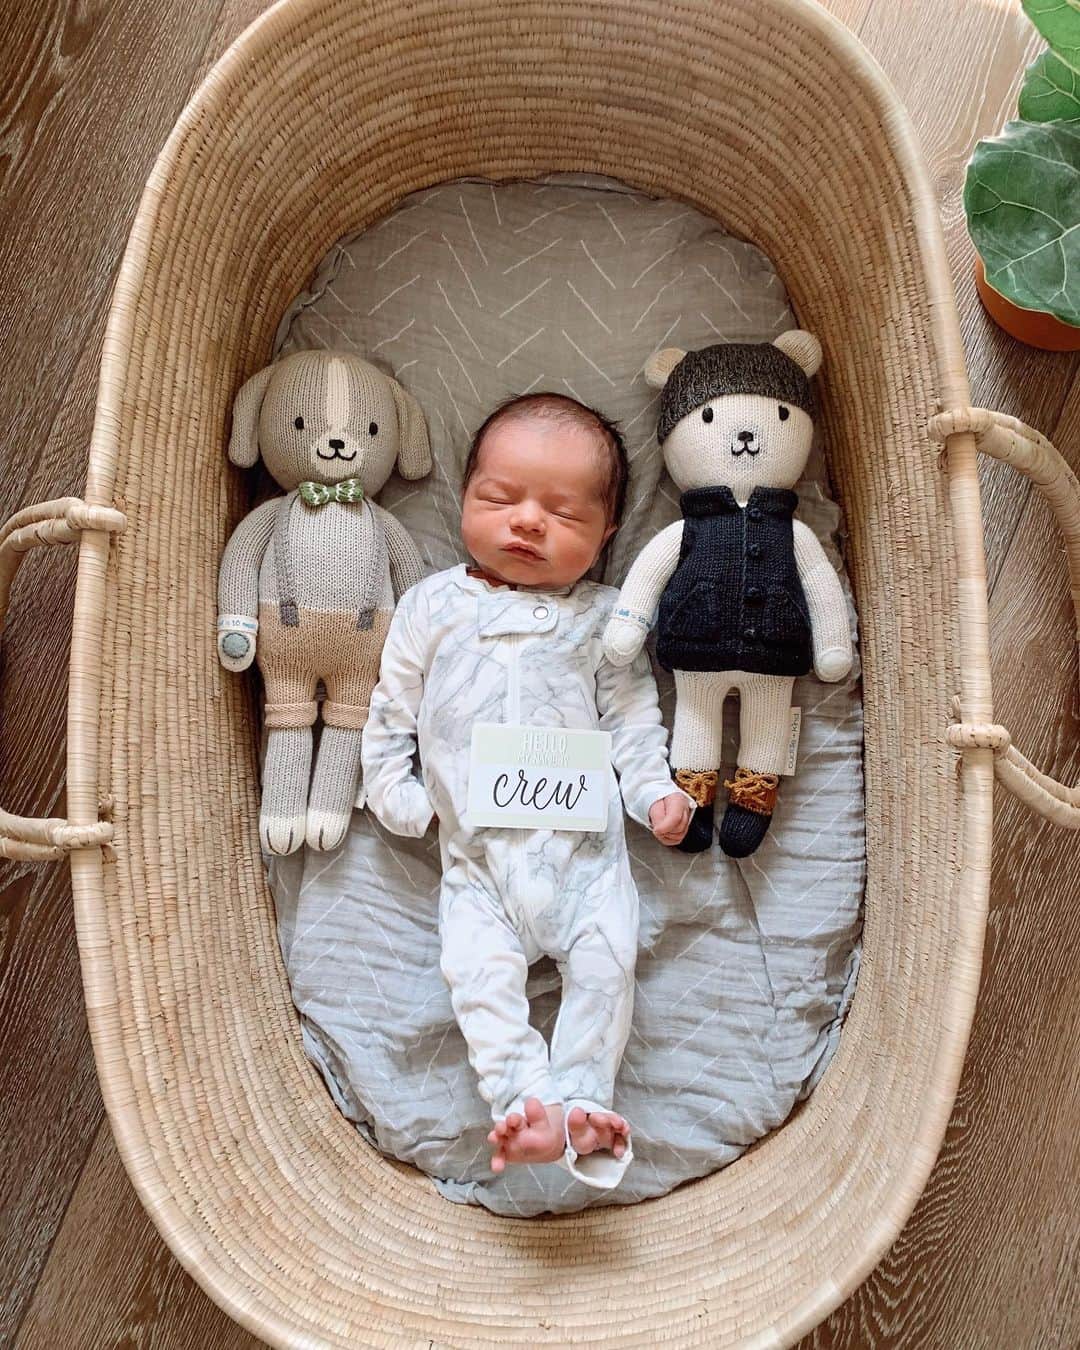 carlyのインスタグラム：「Meet Crew 💛 he joined us October 12th at 12:43pm weighing in at 6 lb 15 oz and 21 inches long. He is healthy and perfect in every way and we couldn’t be more in love!! We’ve waited so long to meet this sweet boy. Thank you for all your messages! I can’t wait to share more of our little angel baby 🥰 #crewelias」